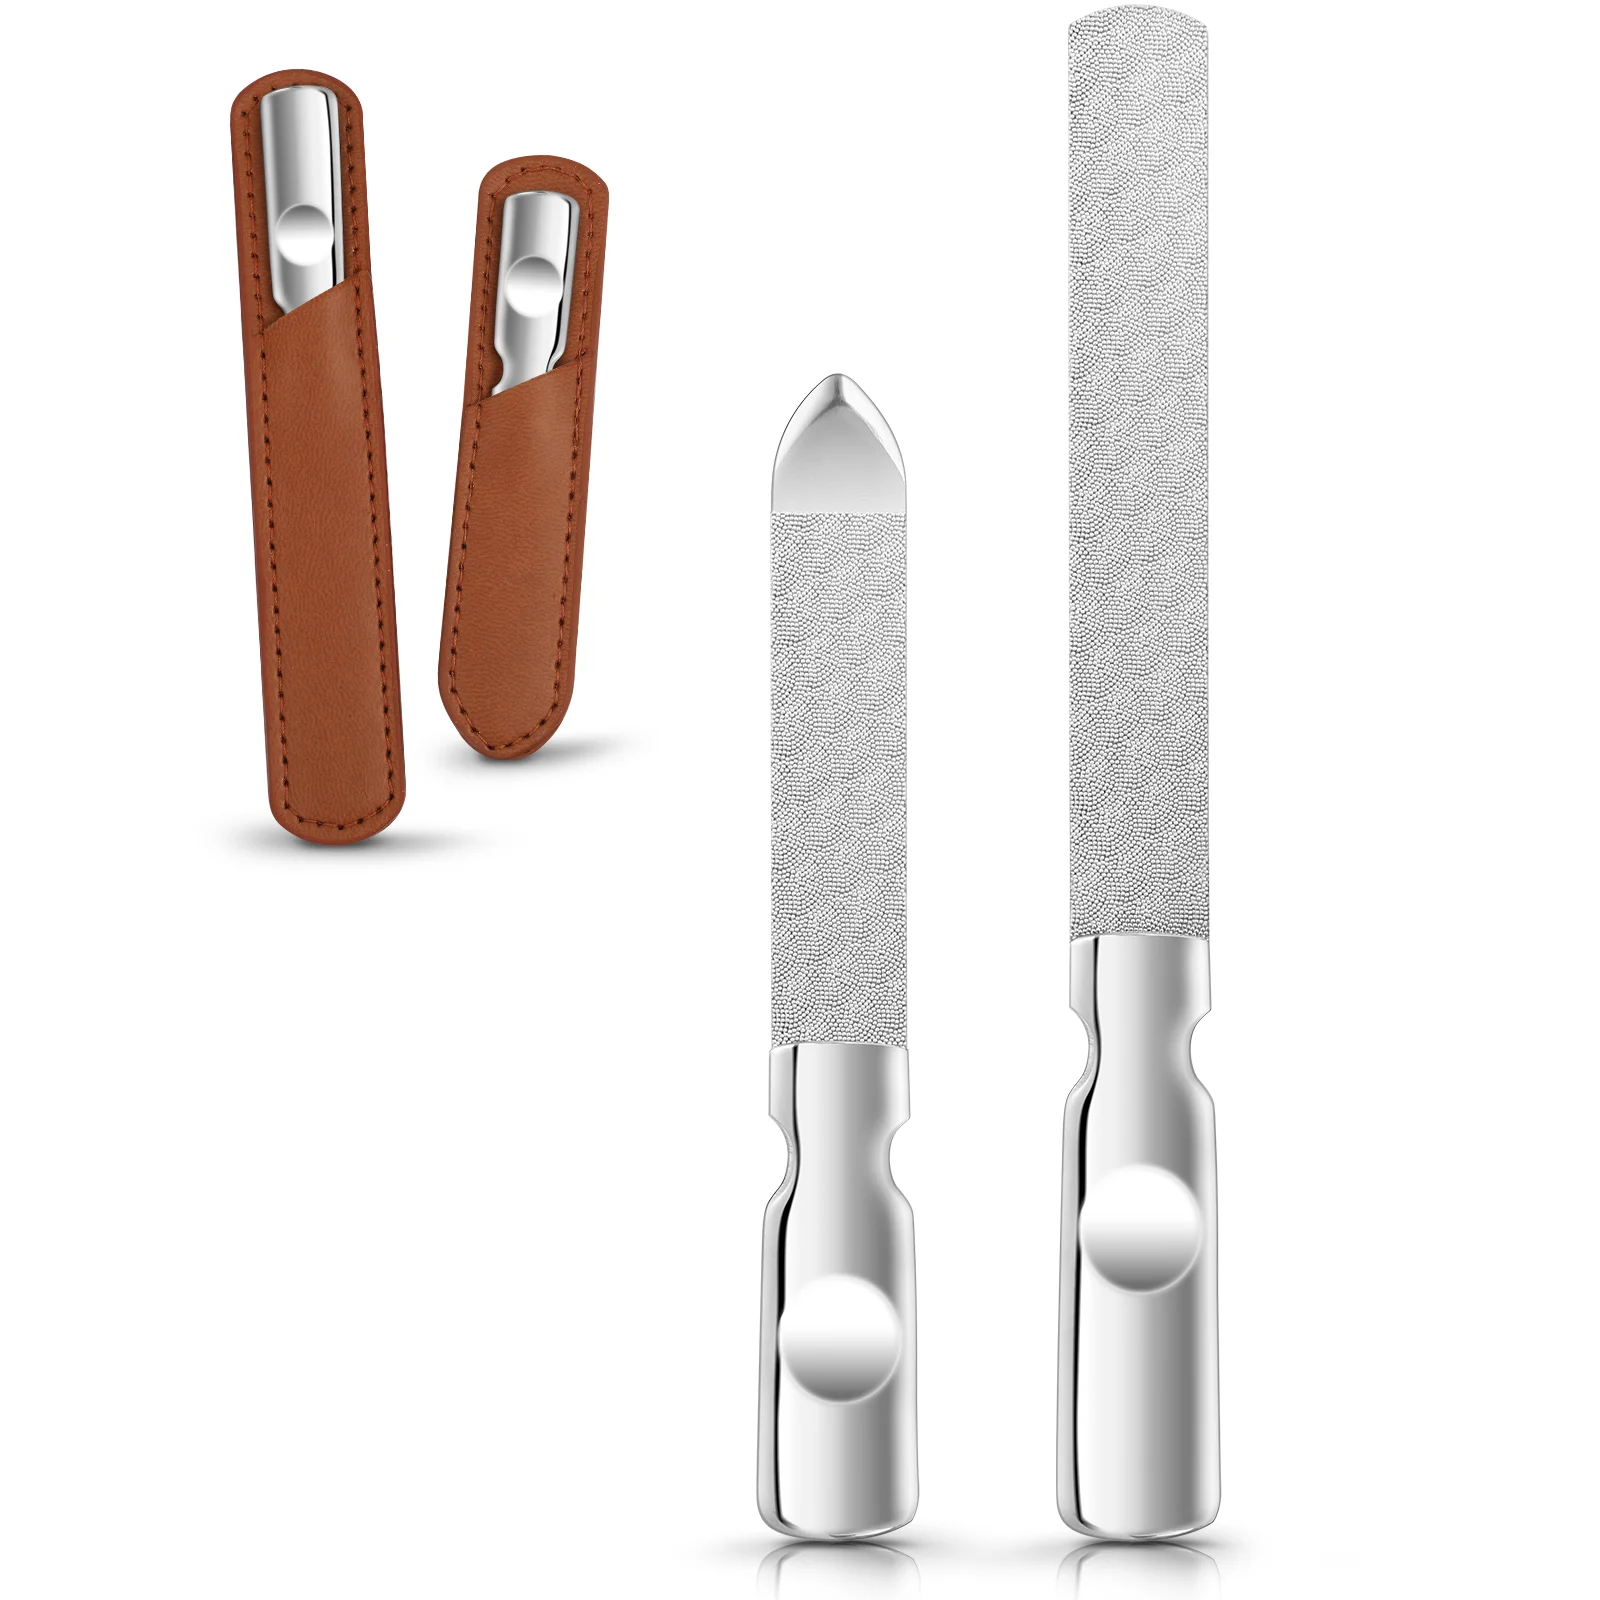 2Pcs Stainless Steel Nail File Double Sided Nail File Manicure Pedicure Tools with Leather Case for Men Women supwee 1pcs stainless steel nail tools toe finger trimmer nail clippers with nail file pro pedicure manicure trimmer cutter